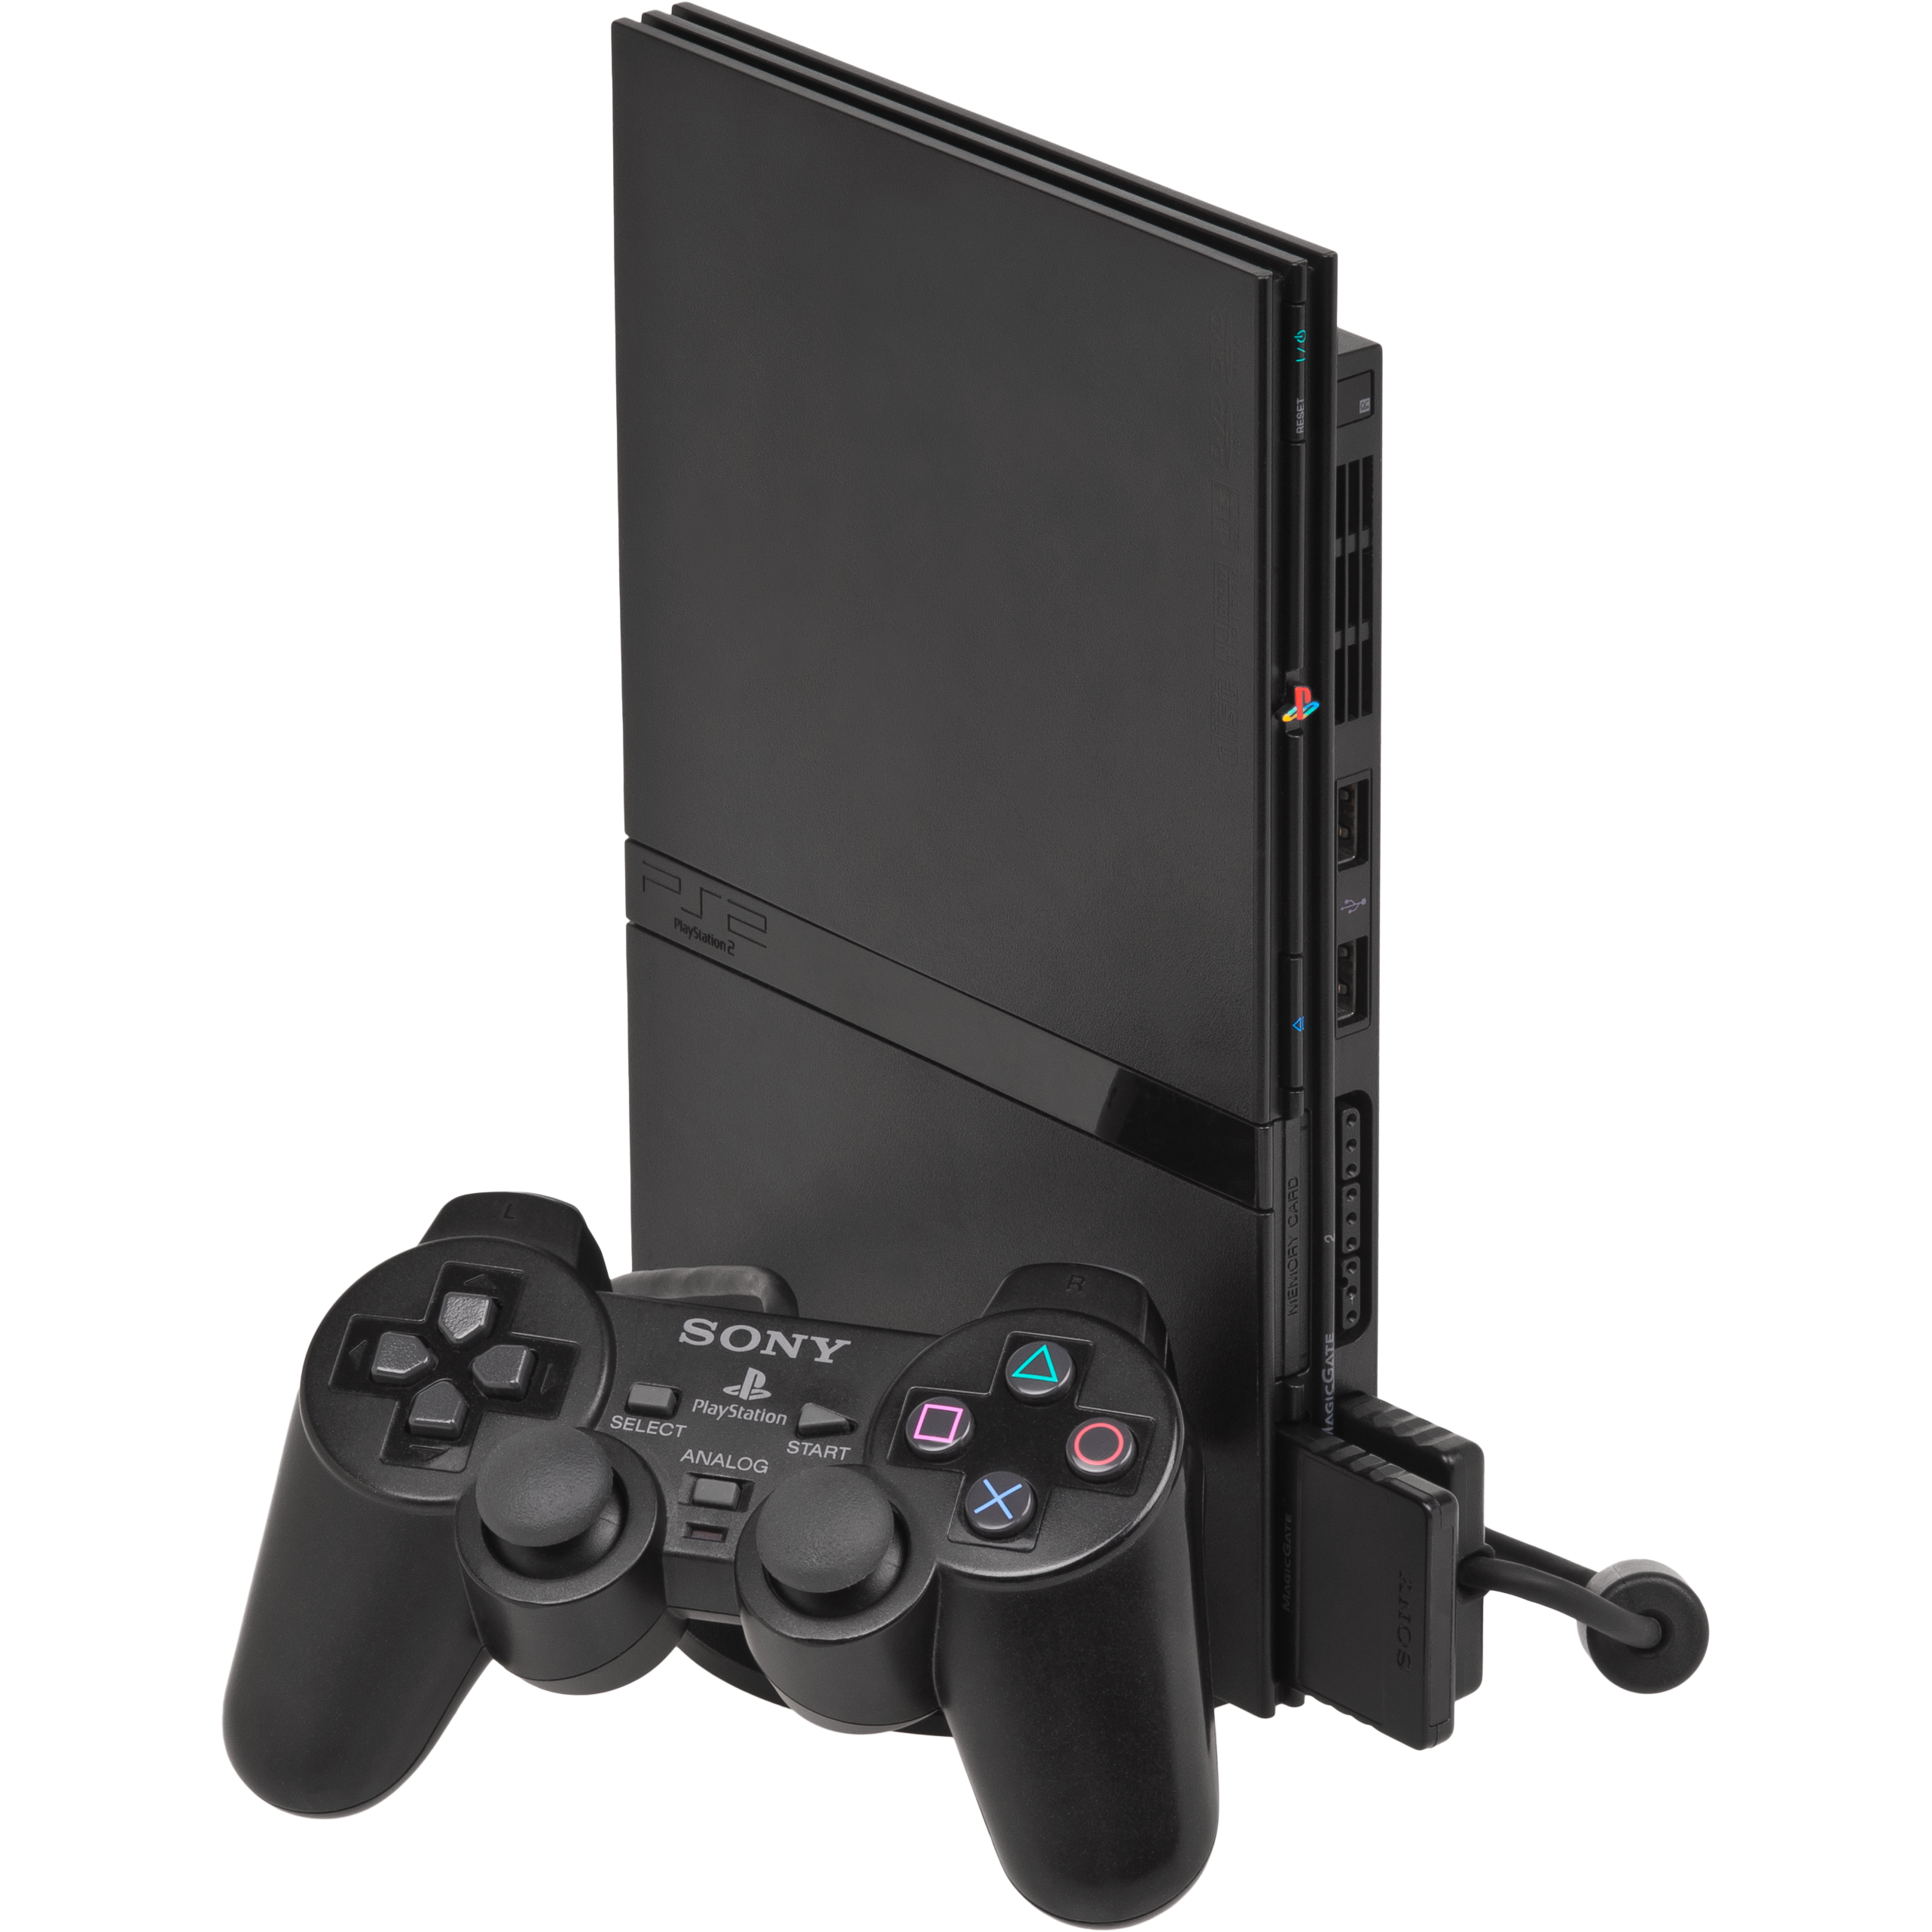 PS2 Systems